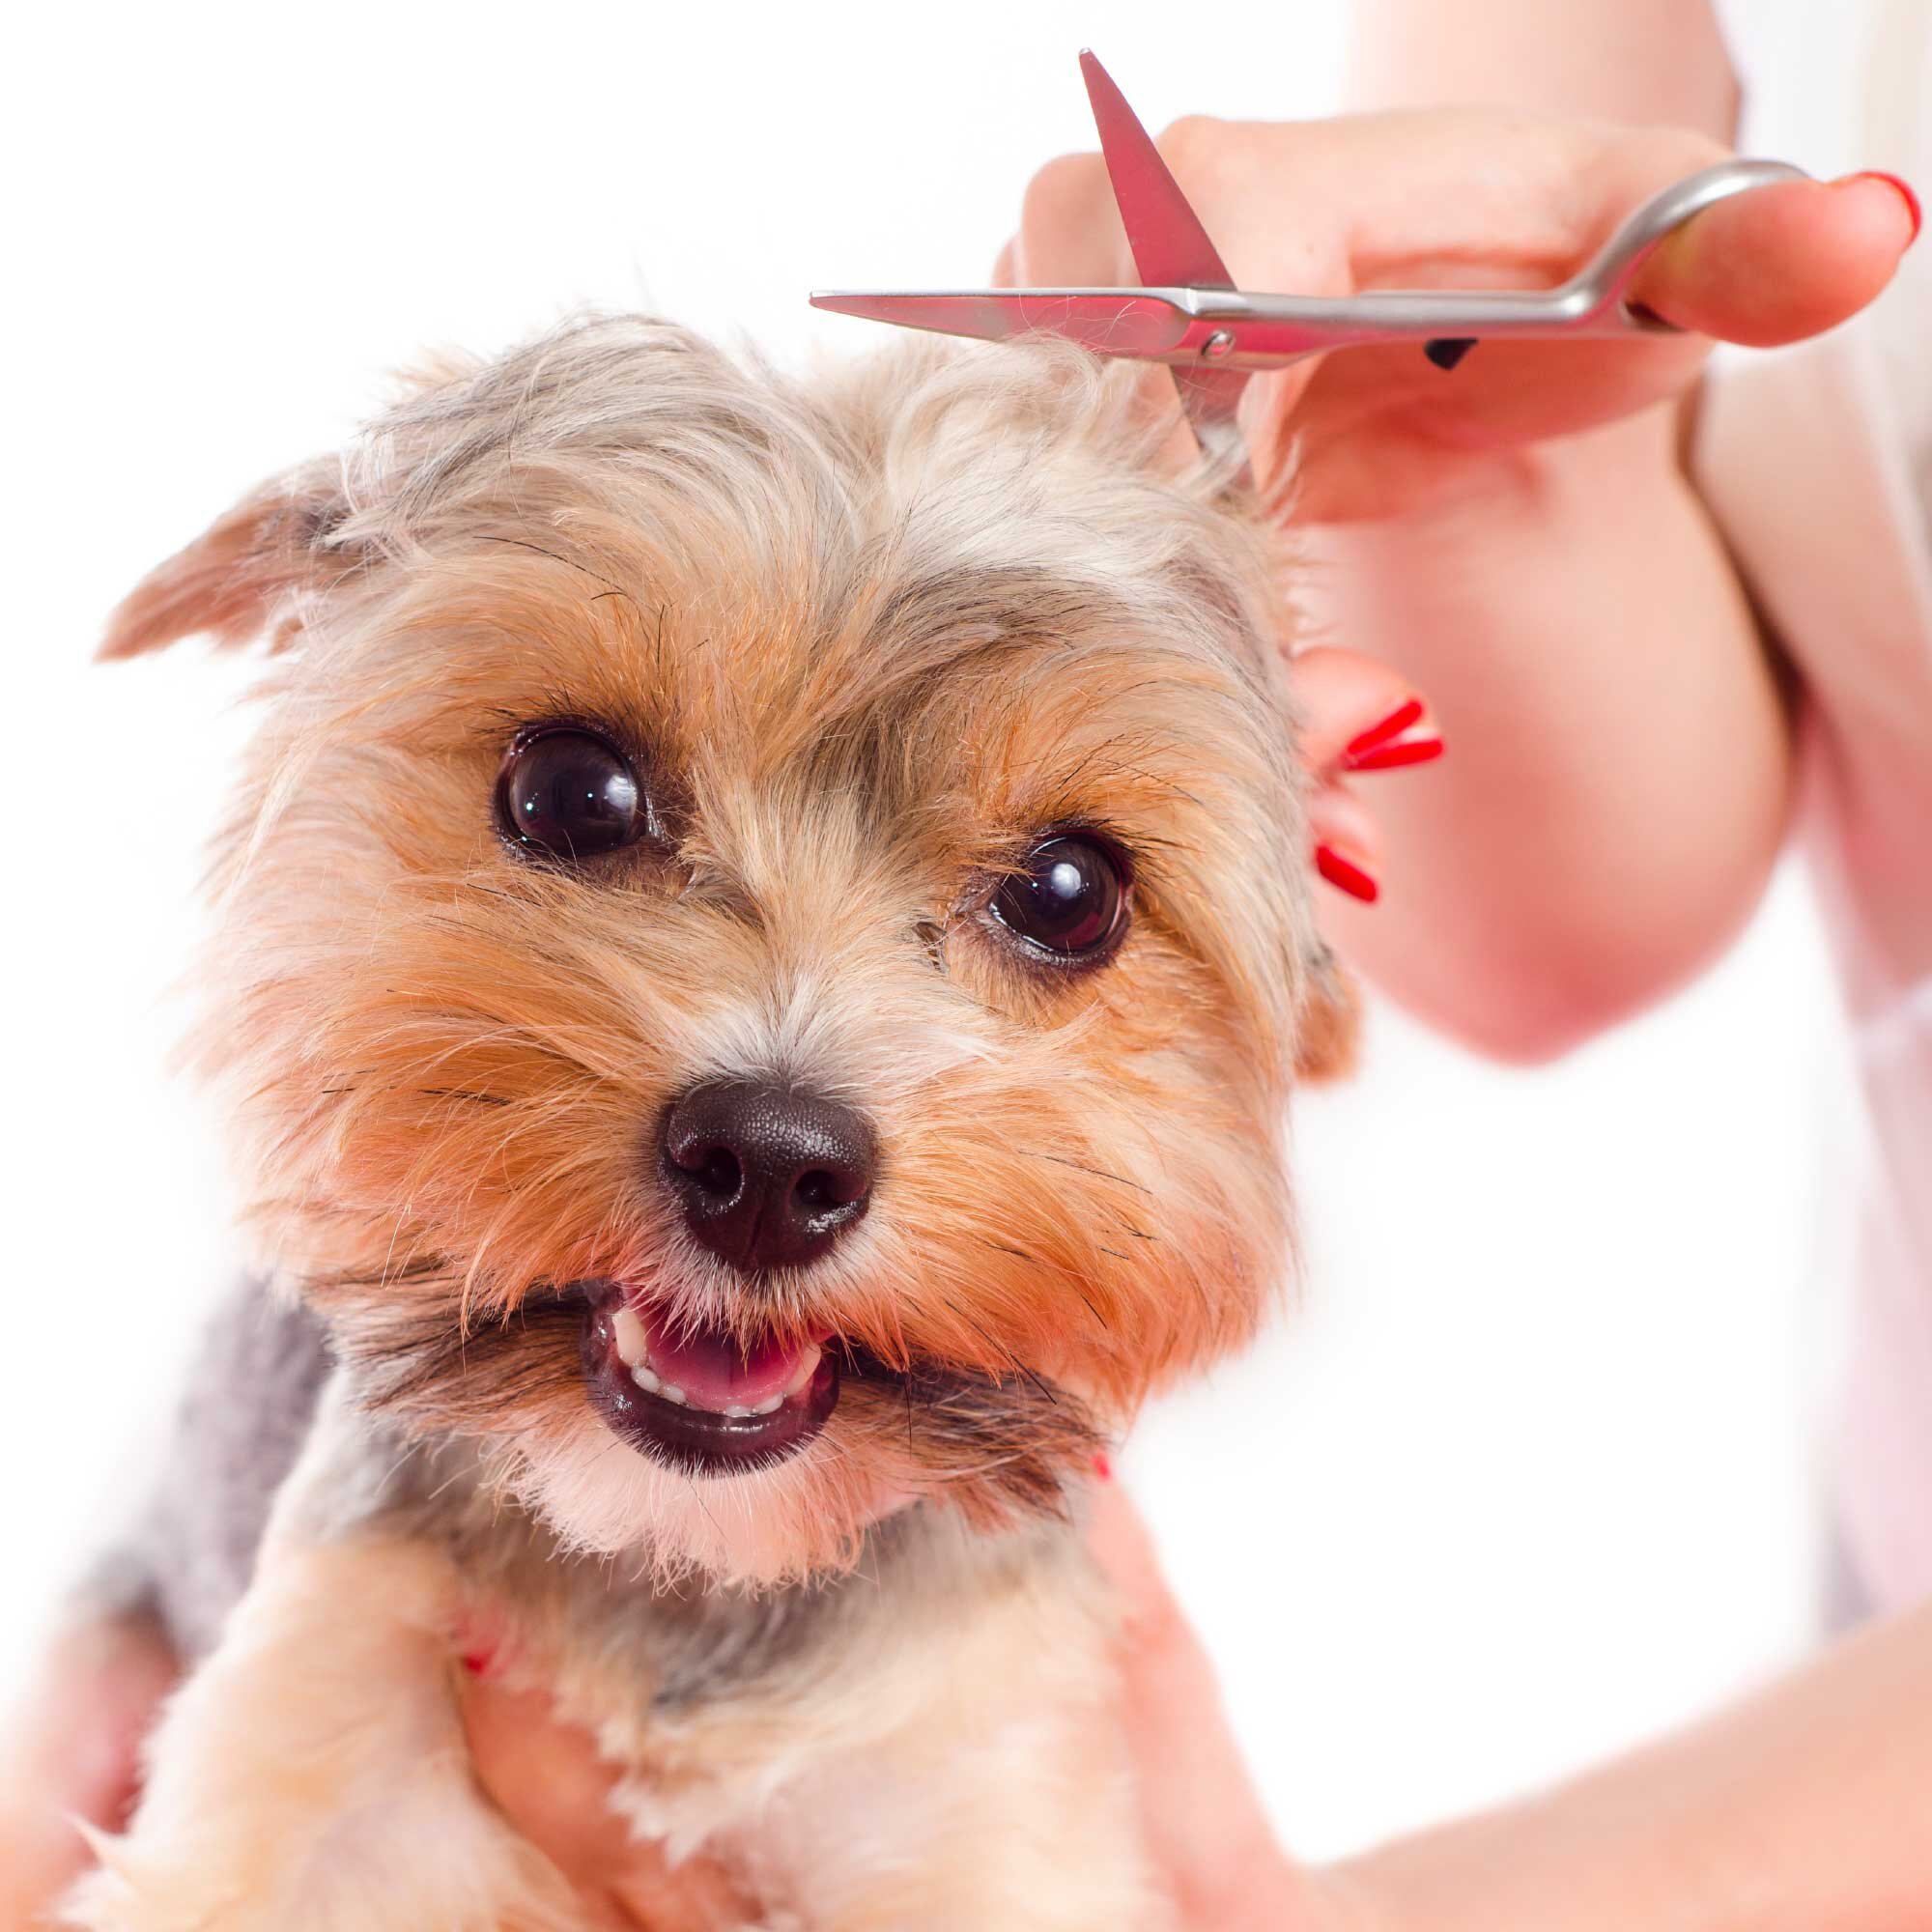 The World of Pet Grooming: A Rewarding Career for Animal Lovers插图3